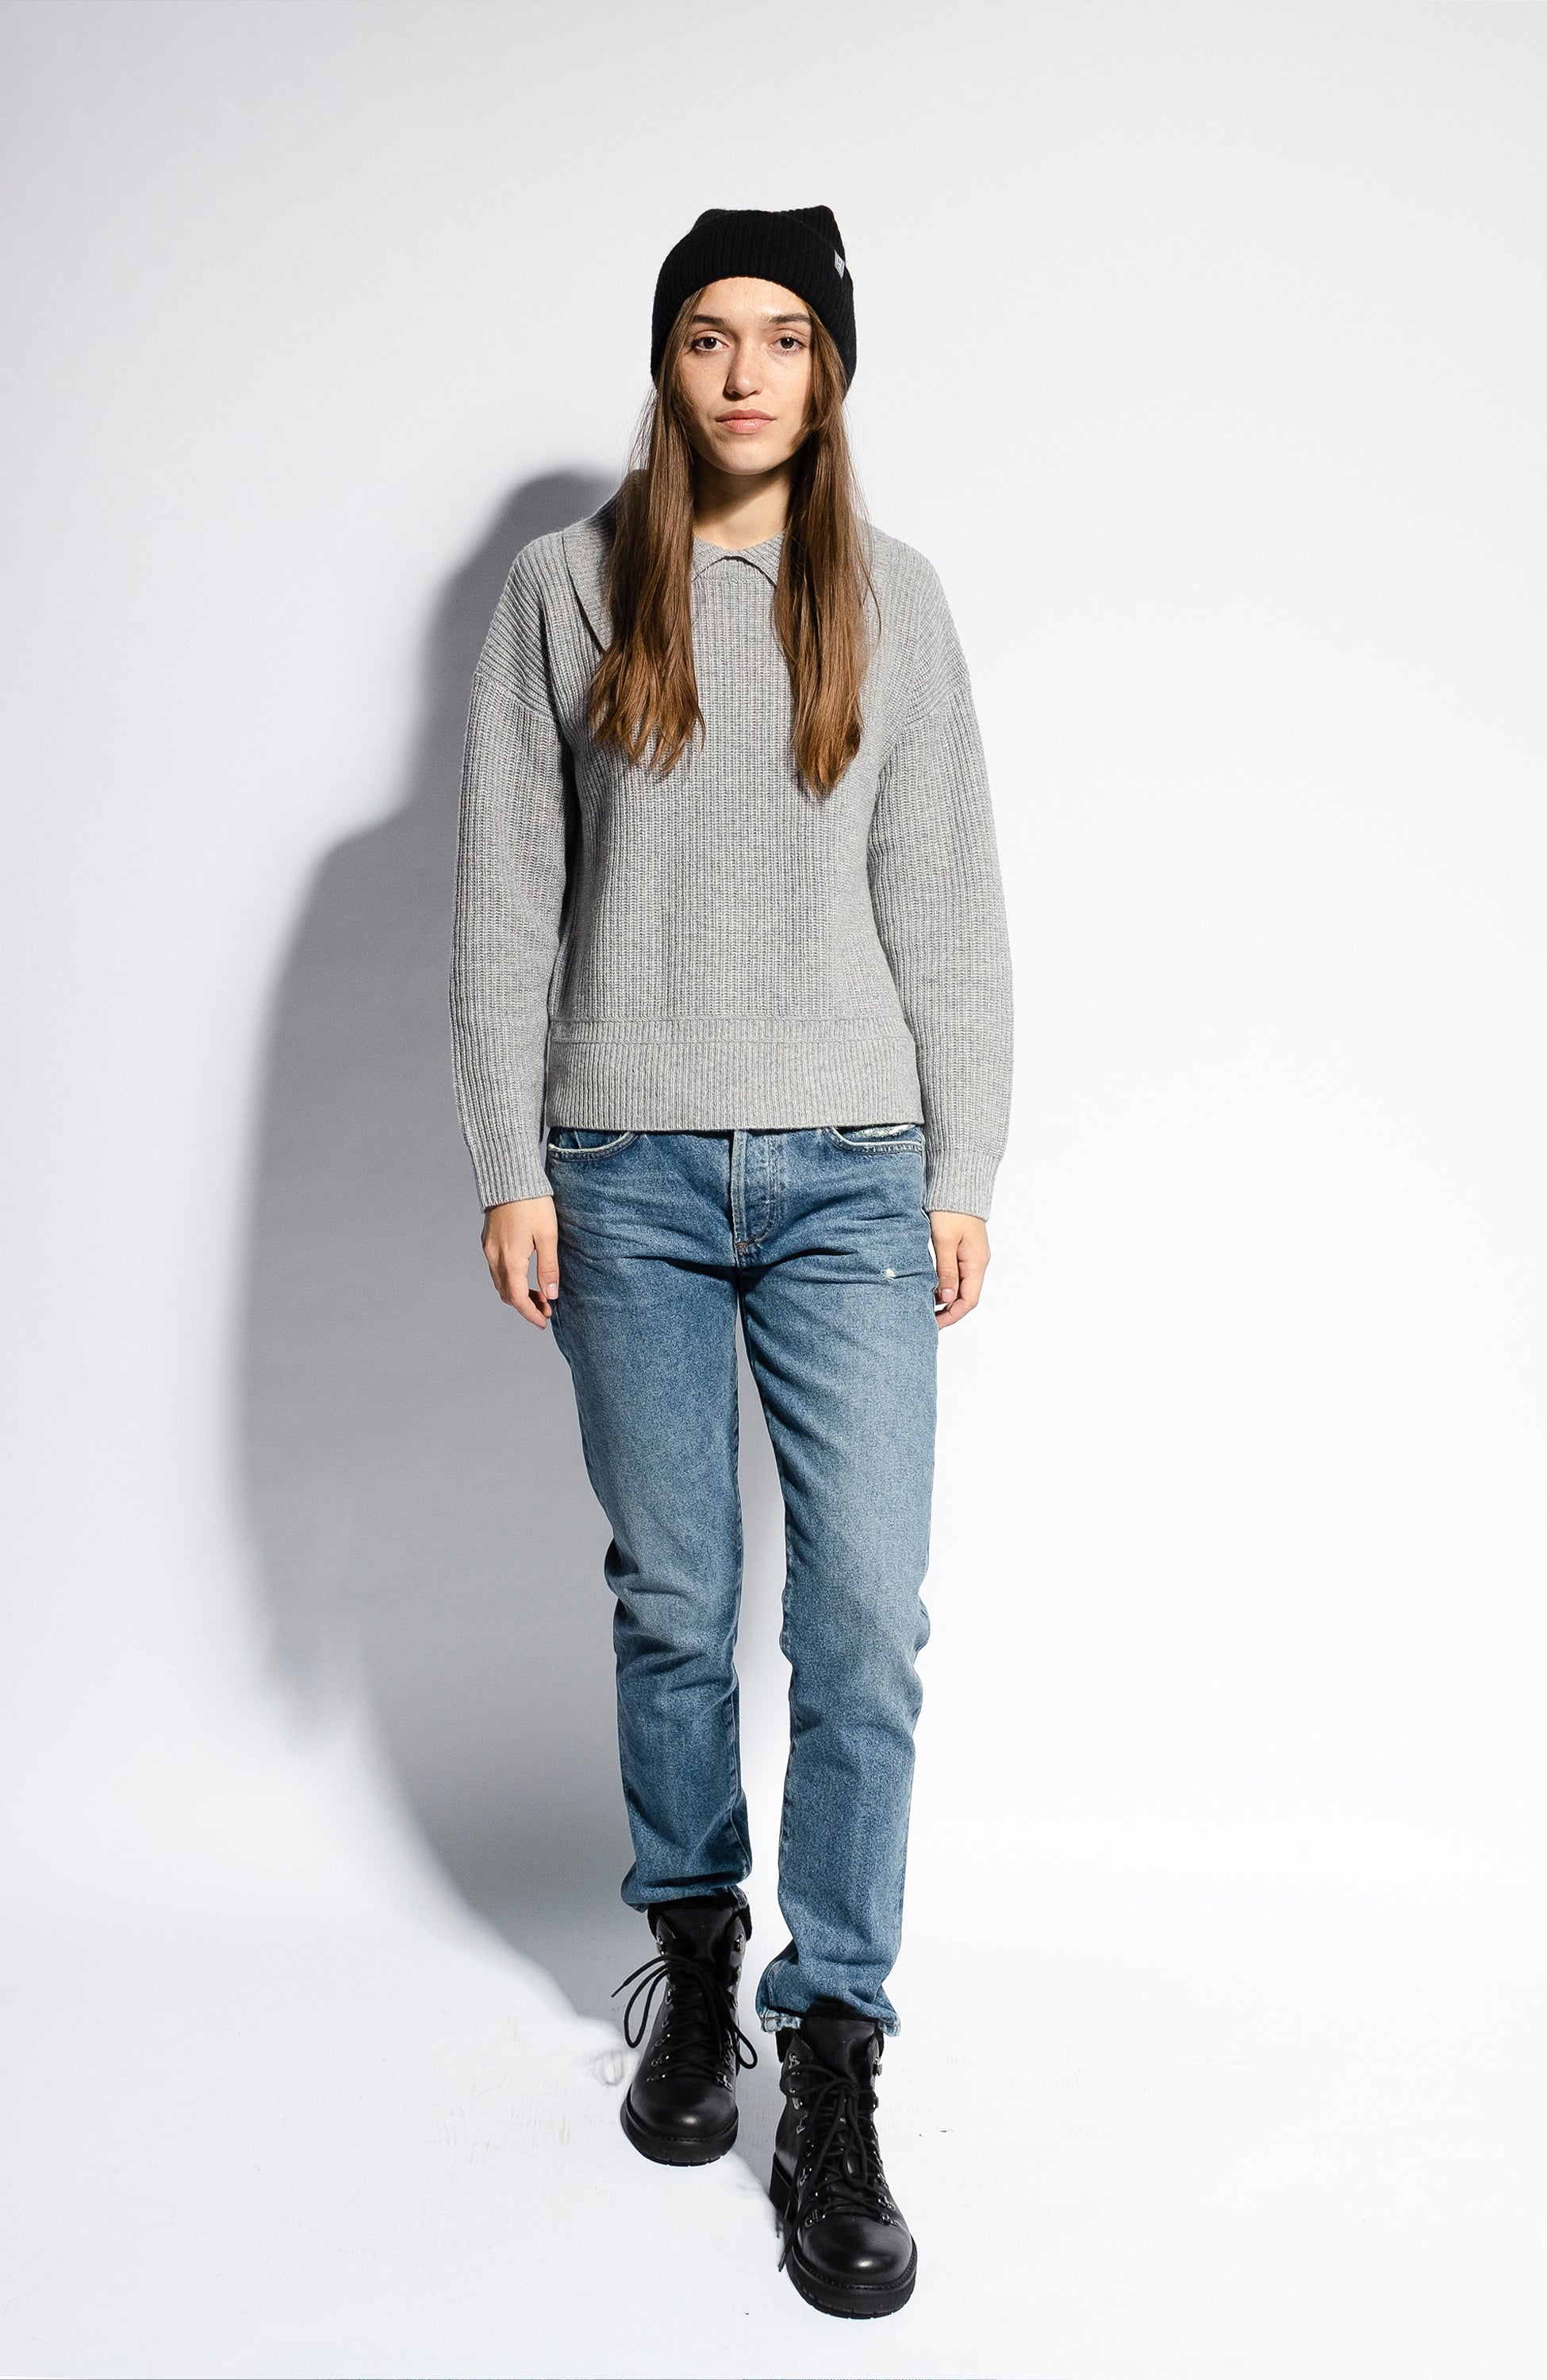 Poloneck cashmere pullover